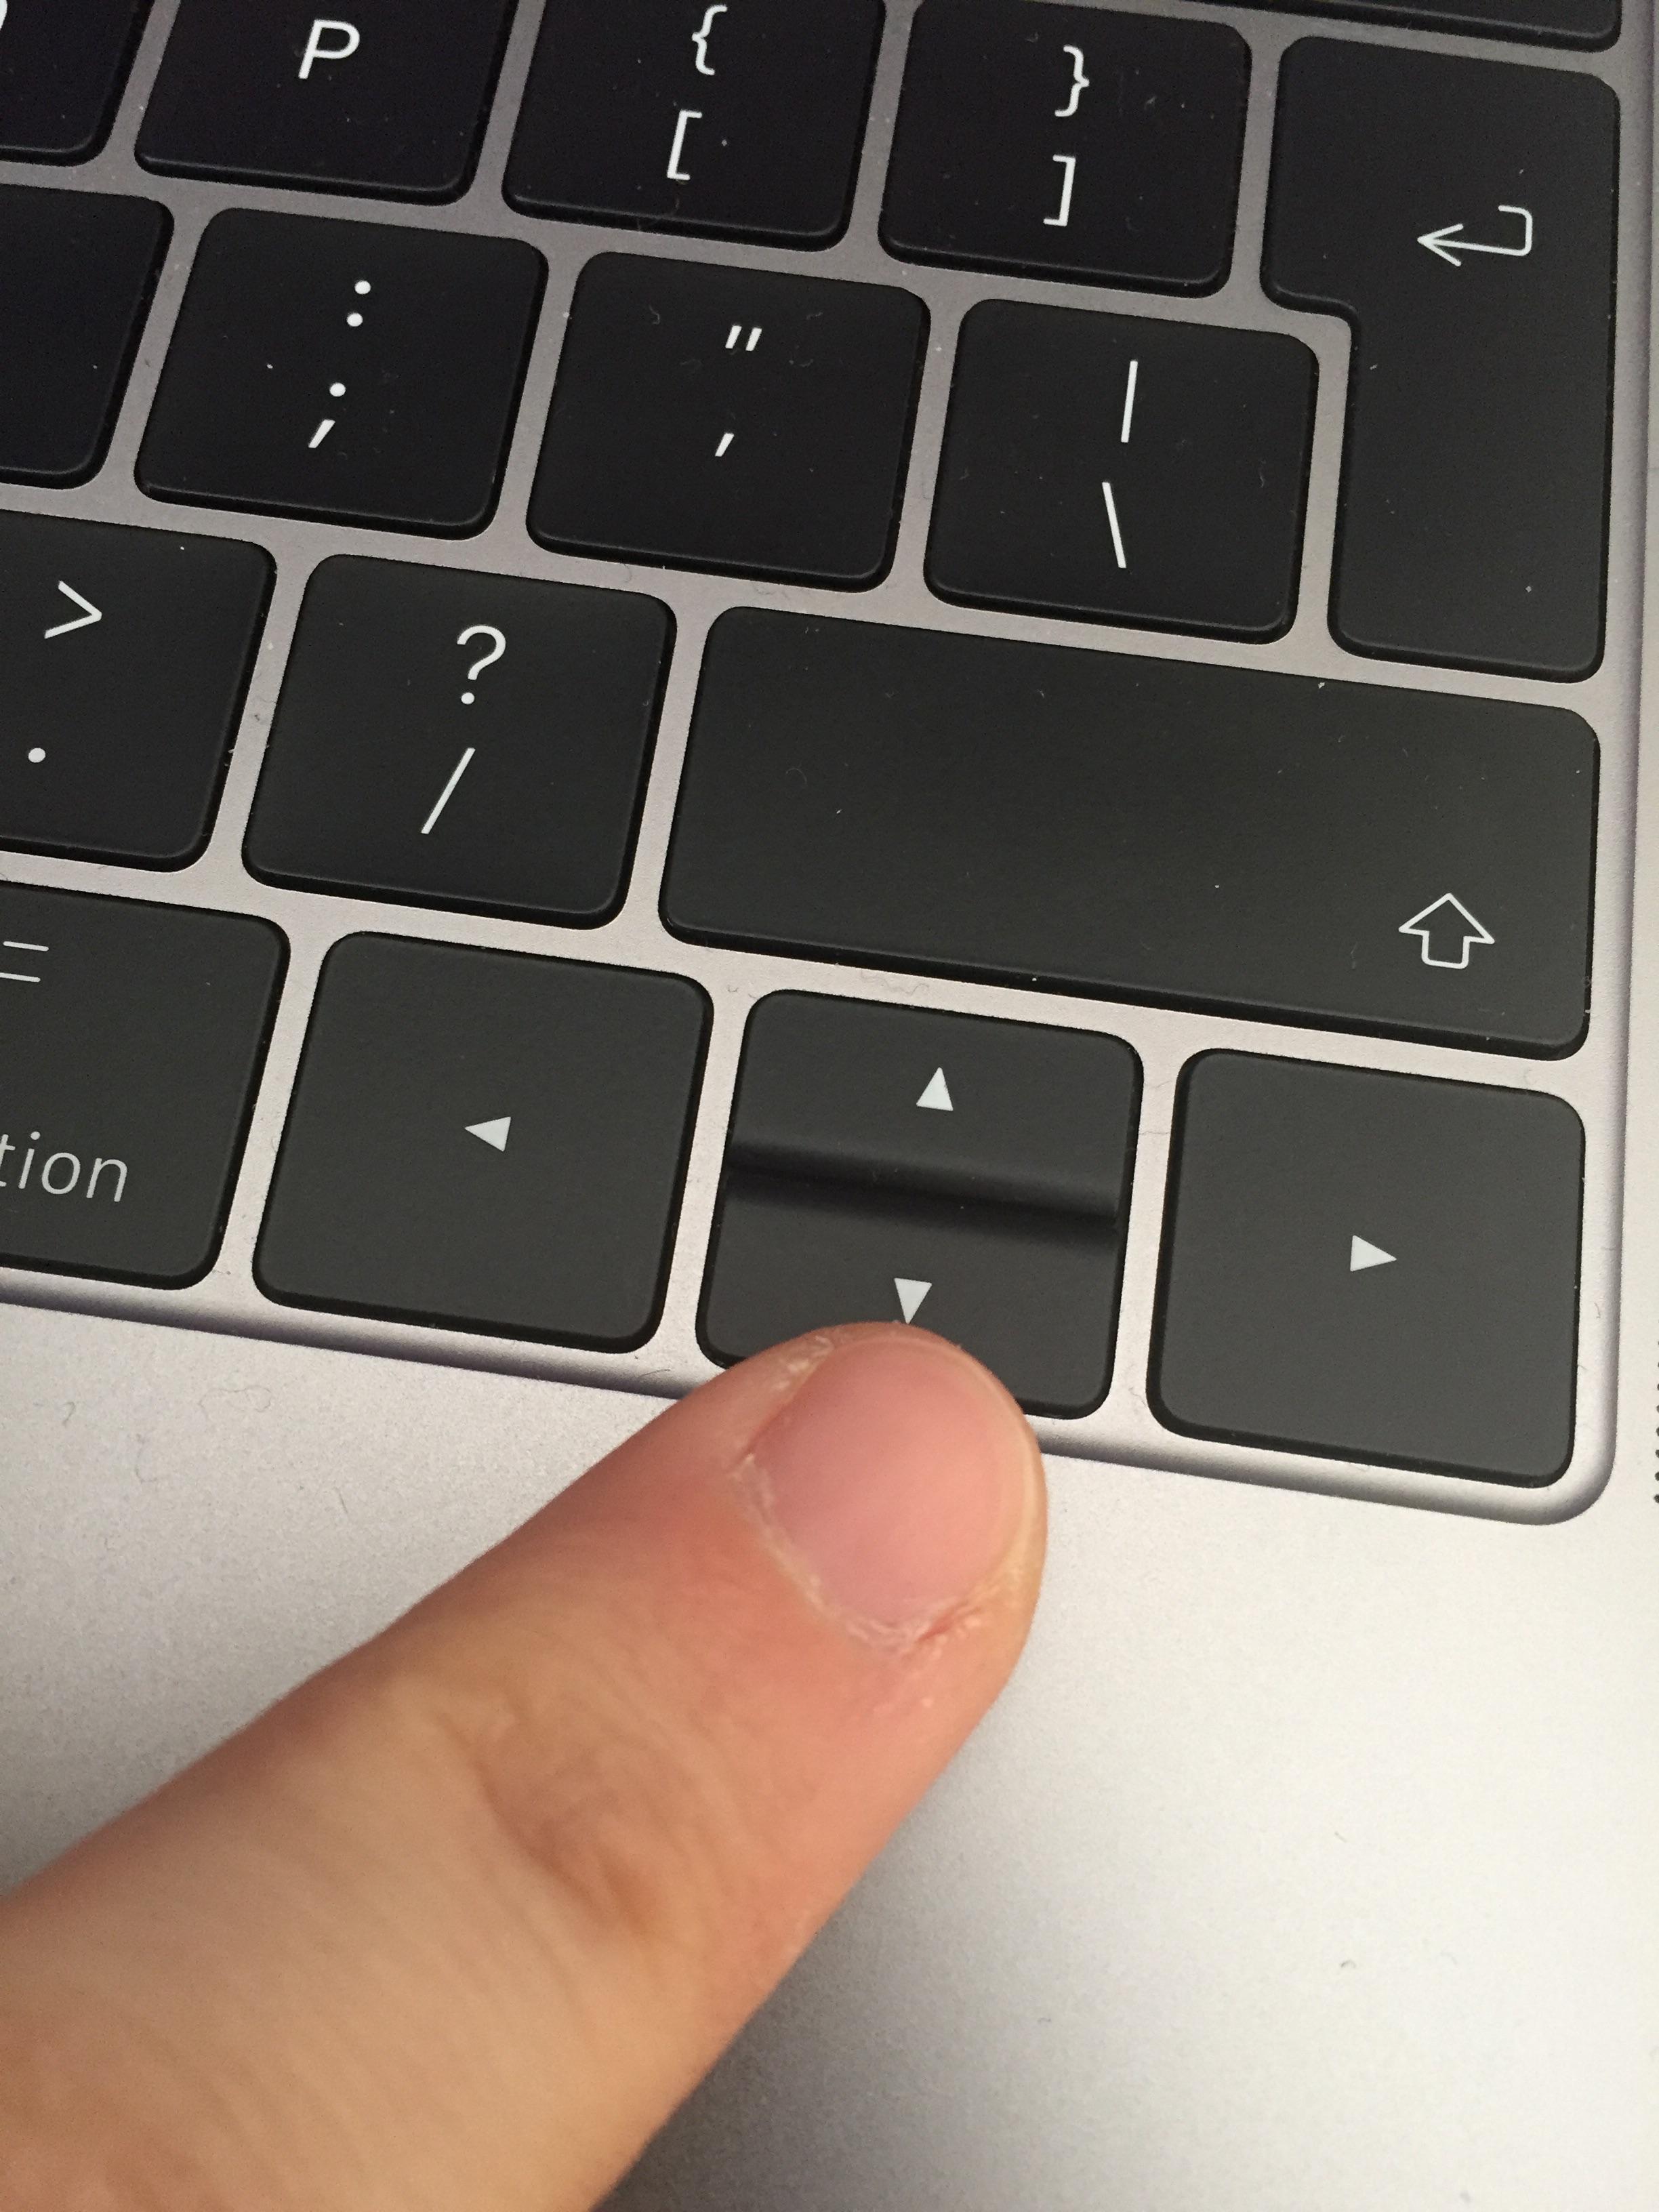 How To Close An App On Mac With Keyboard